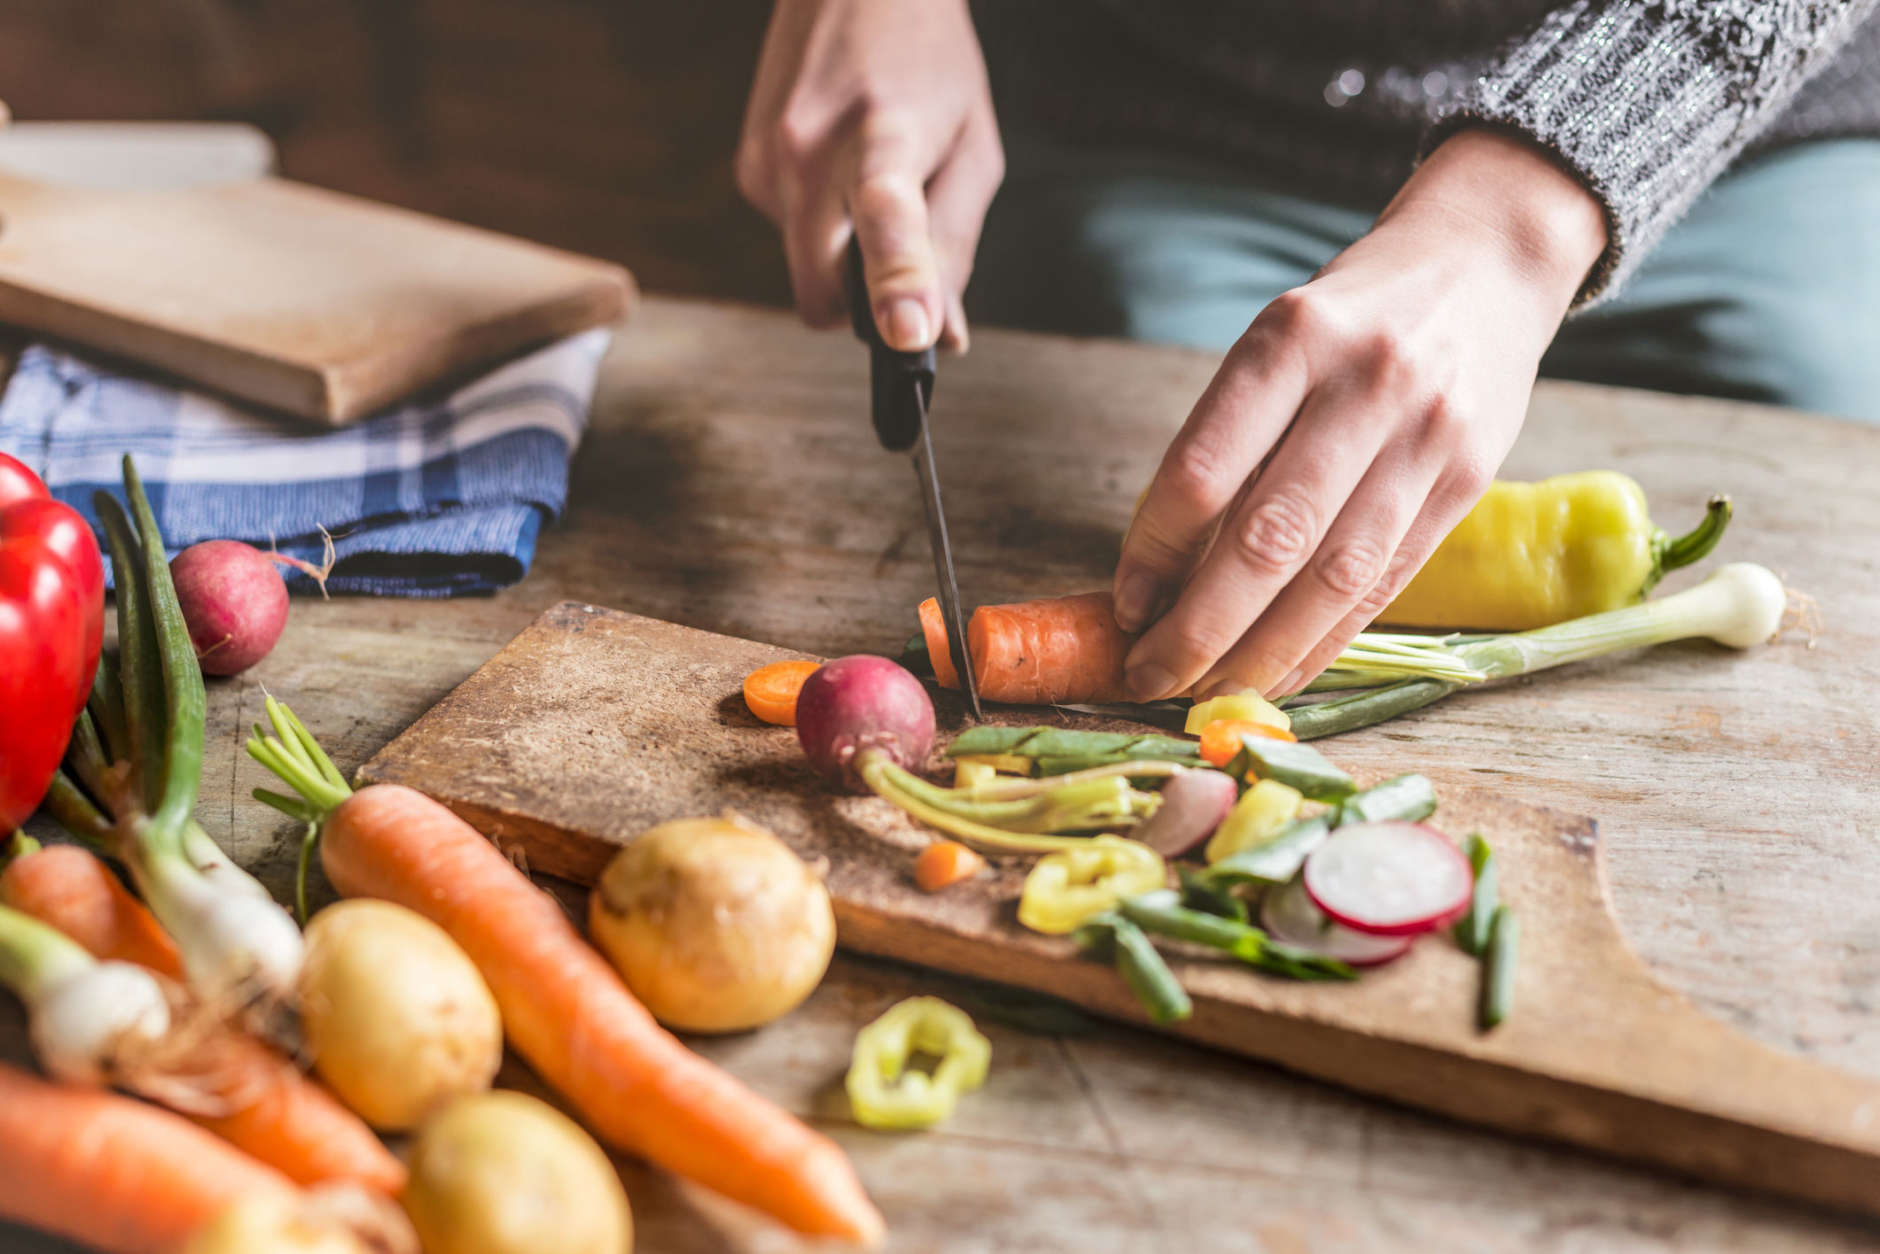 With the hustle and bustle of everyday life, it can seem almost impossible to get a healthy meal on the table. (Thinkstock)